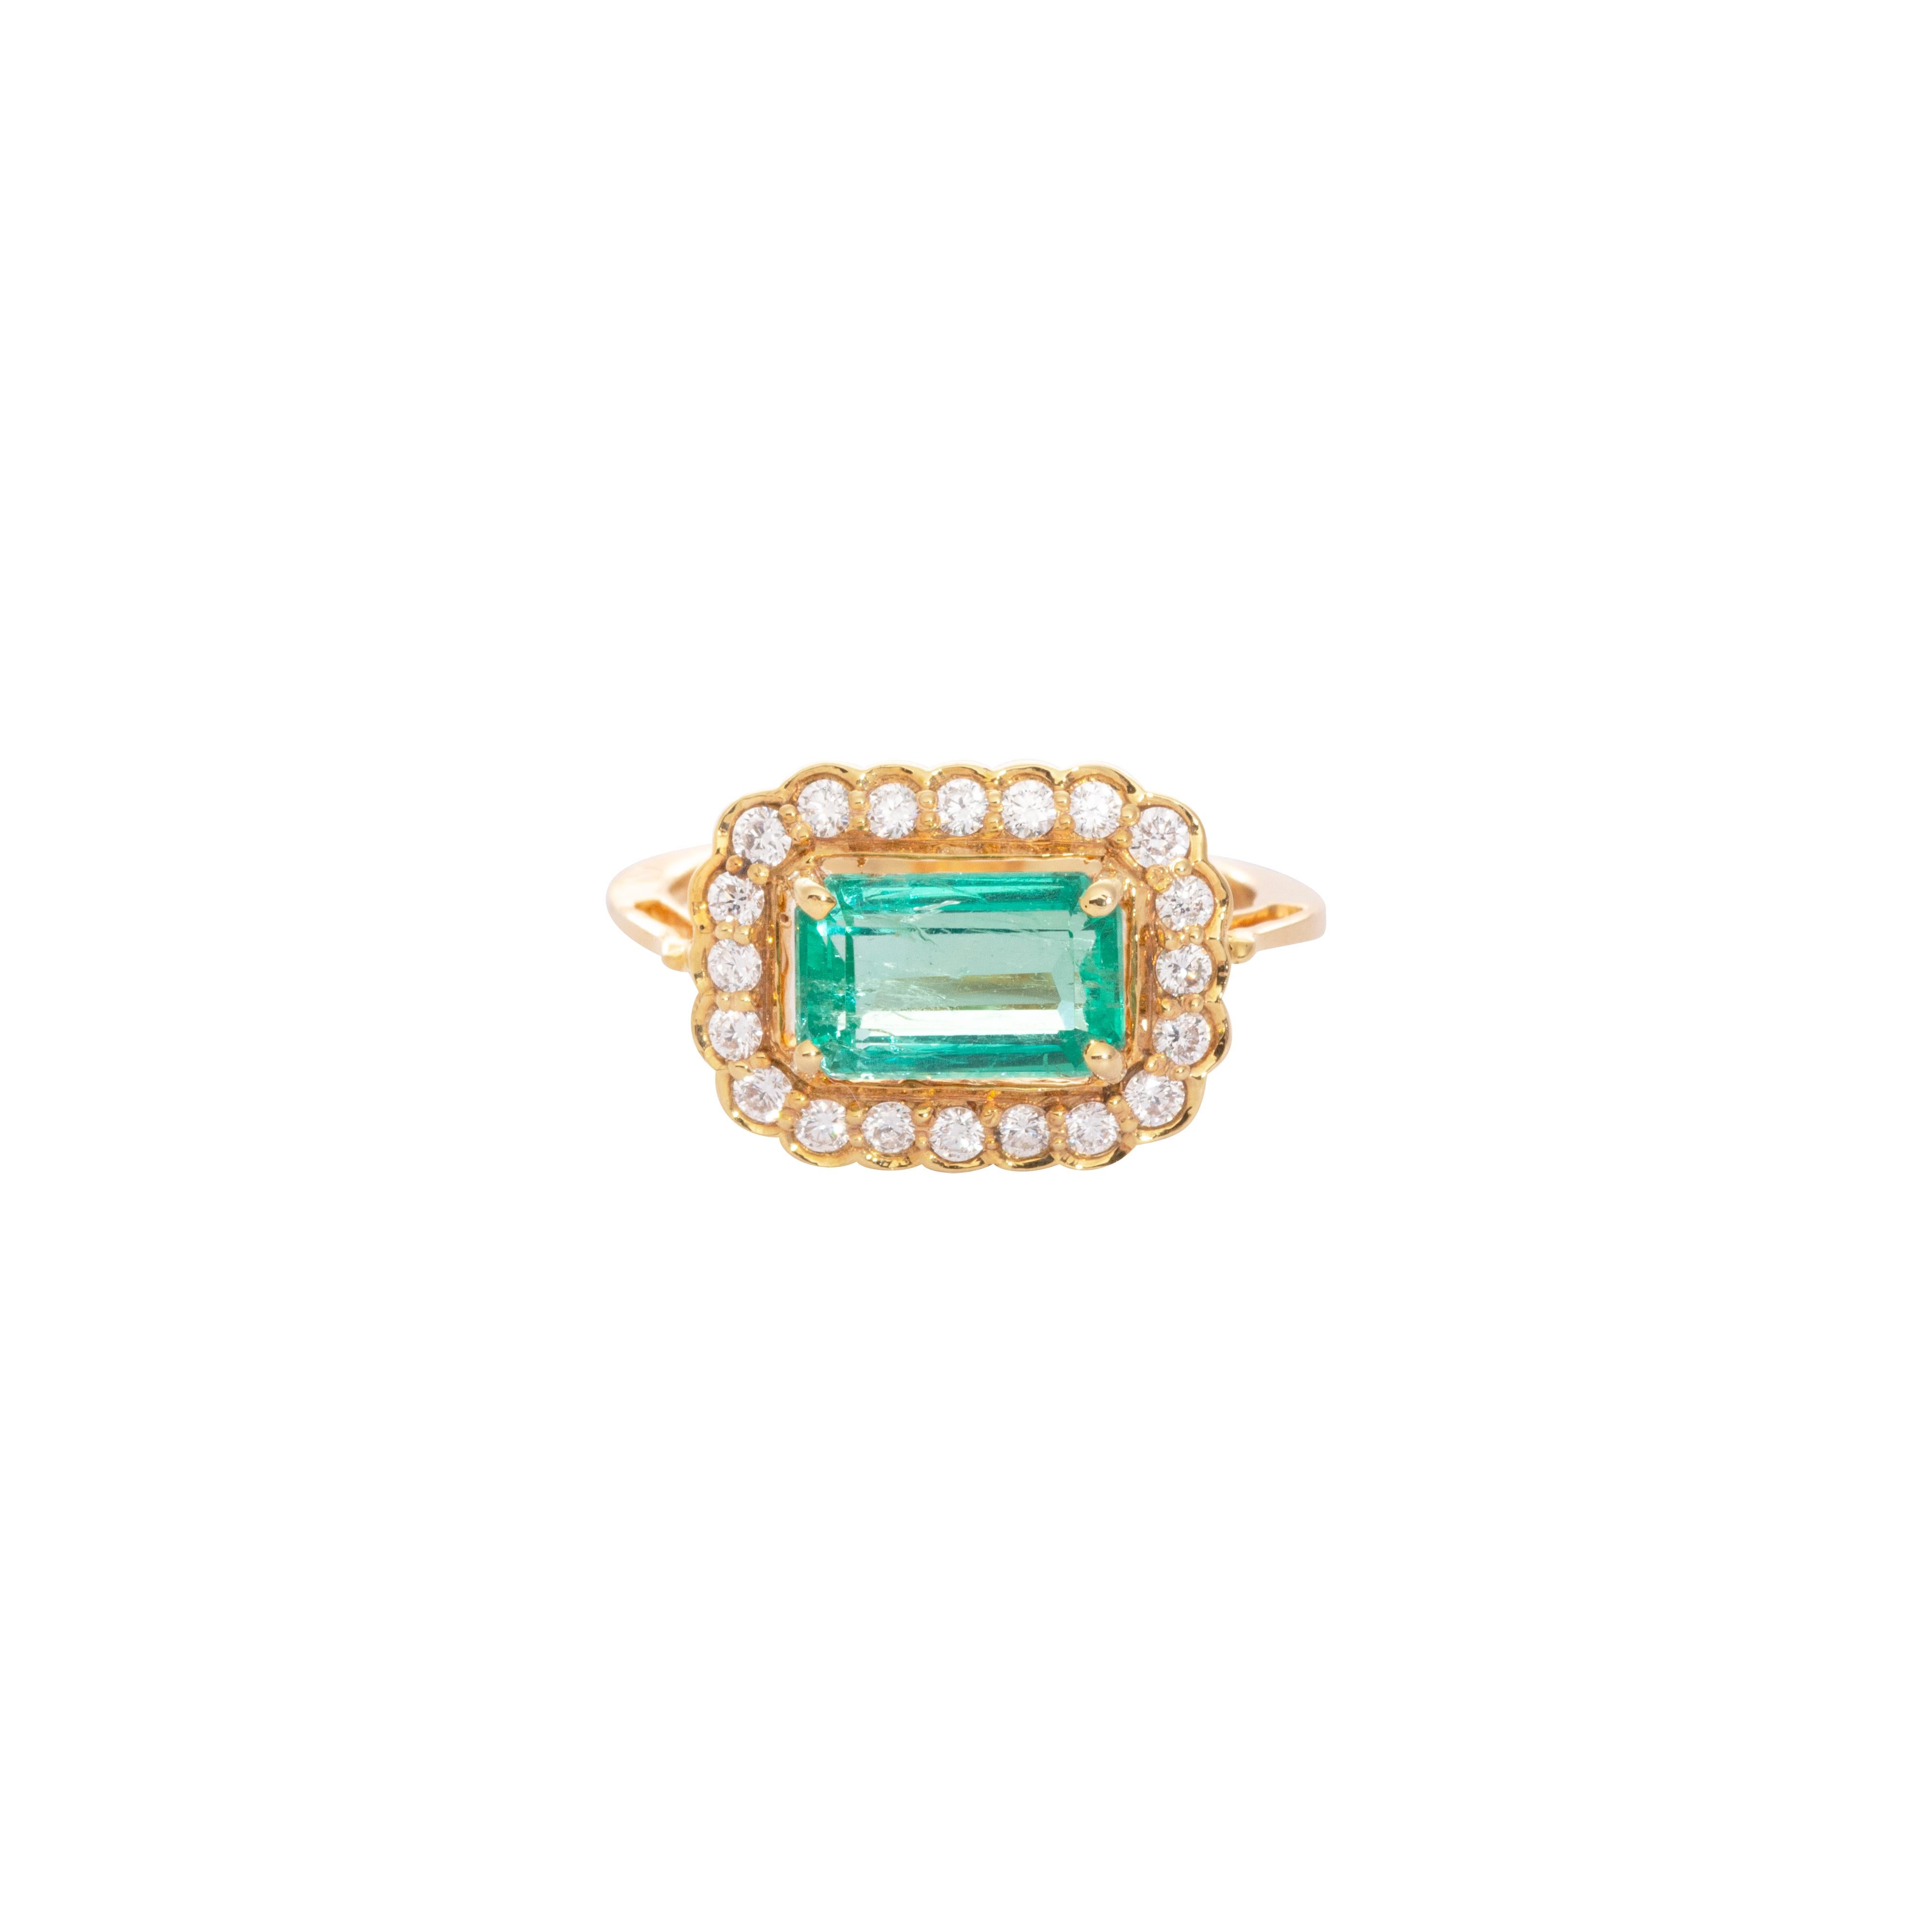 18 Karat Yellow Gold Emerald Diamond Ring.

Beautiful blueish green emerald surrounded by a halo of white diamonds set in 18 Karat Yellow Gold. This ring is ideal for evening wear including cocktails.

Diamonds - 0.33cts
Emerald - 1.61cts
18 Karat